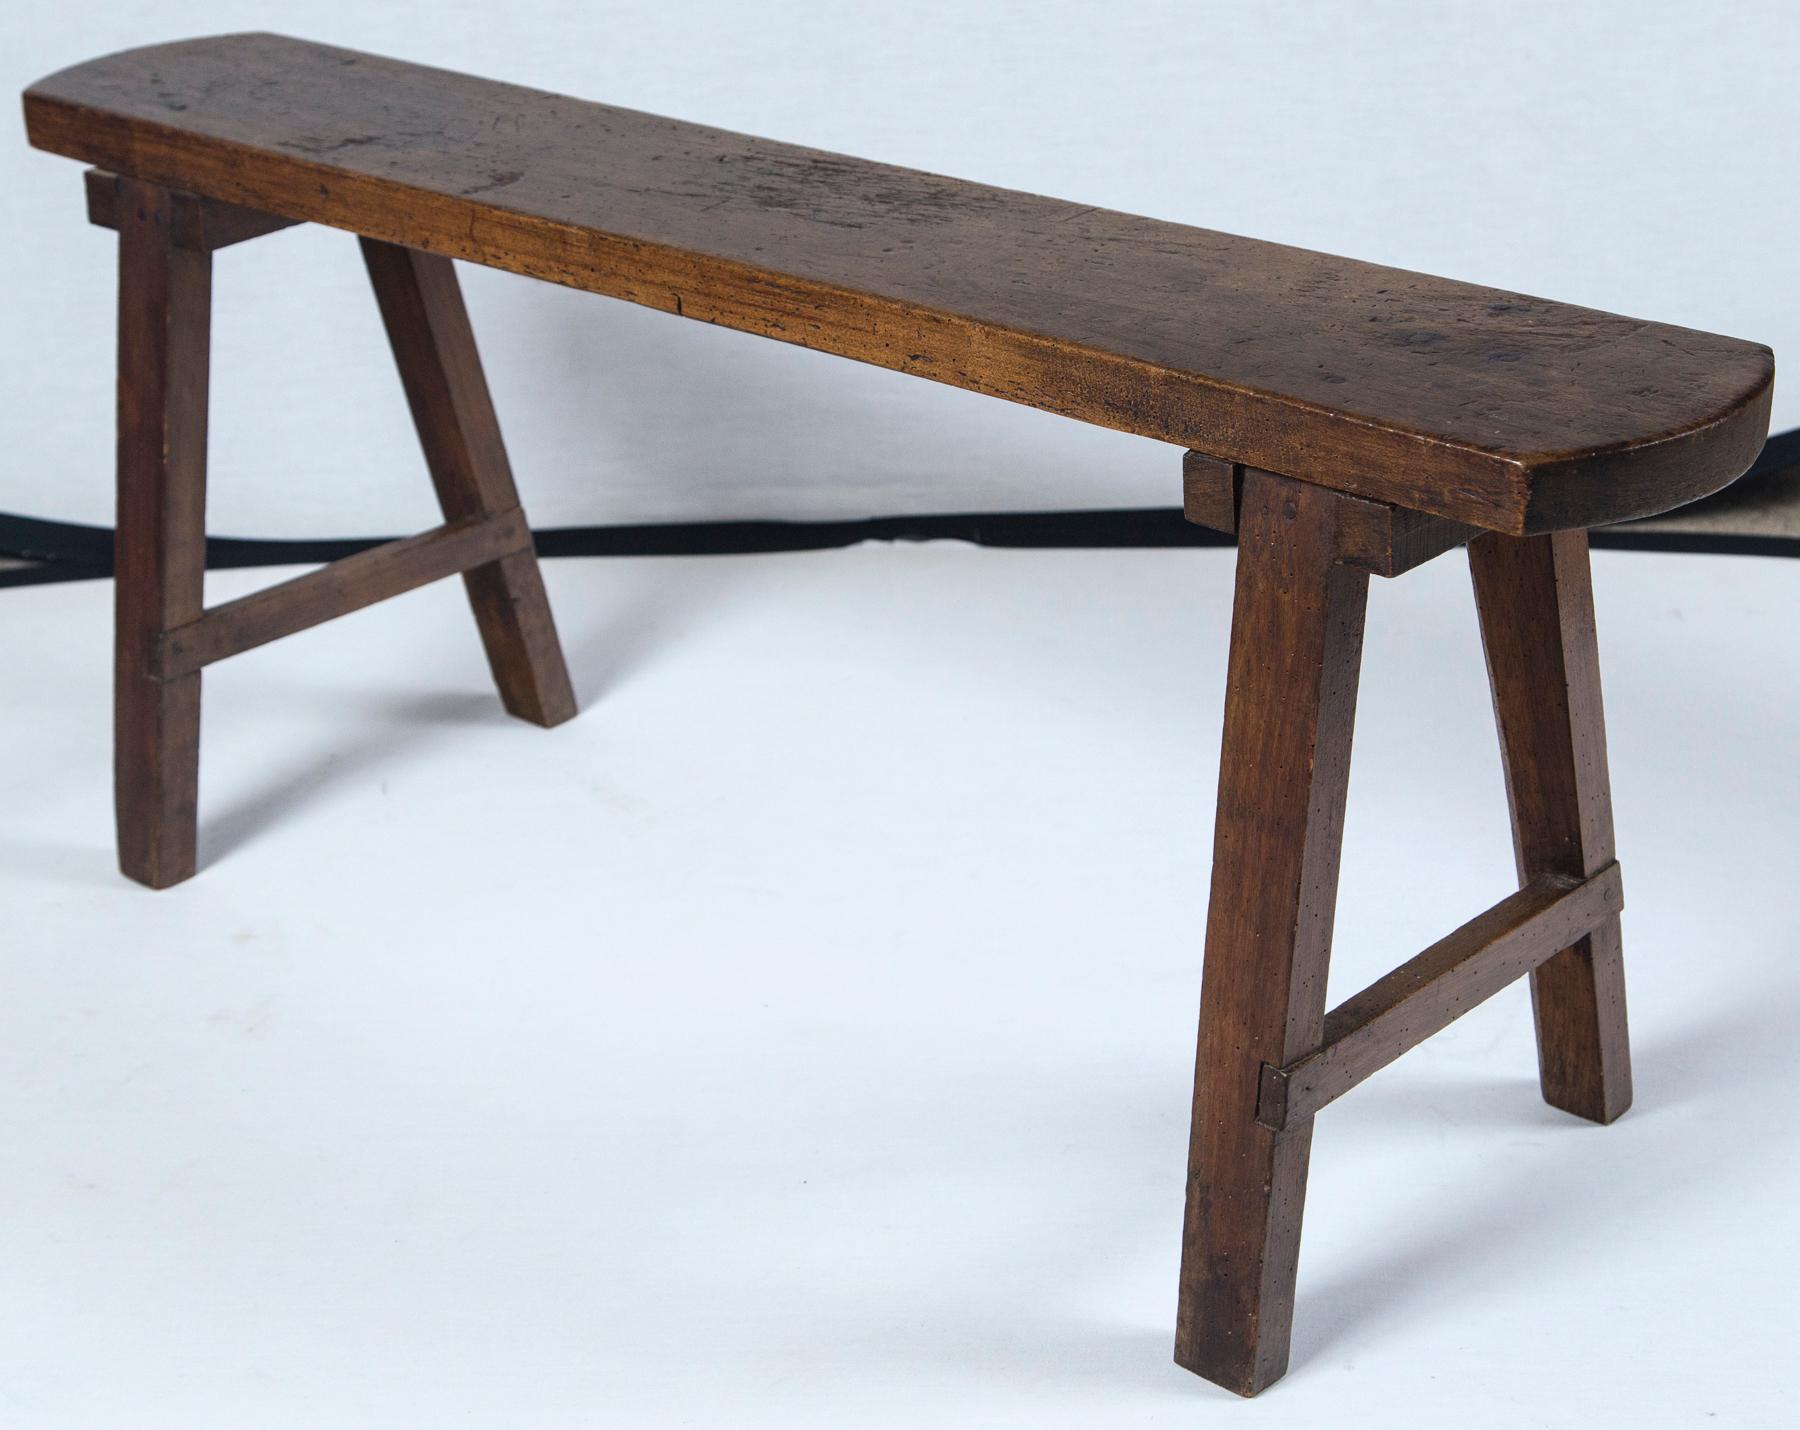 Pair of Chinese Provincial benches, circa 1900. Hardwood construction with rich, aged patina.